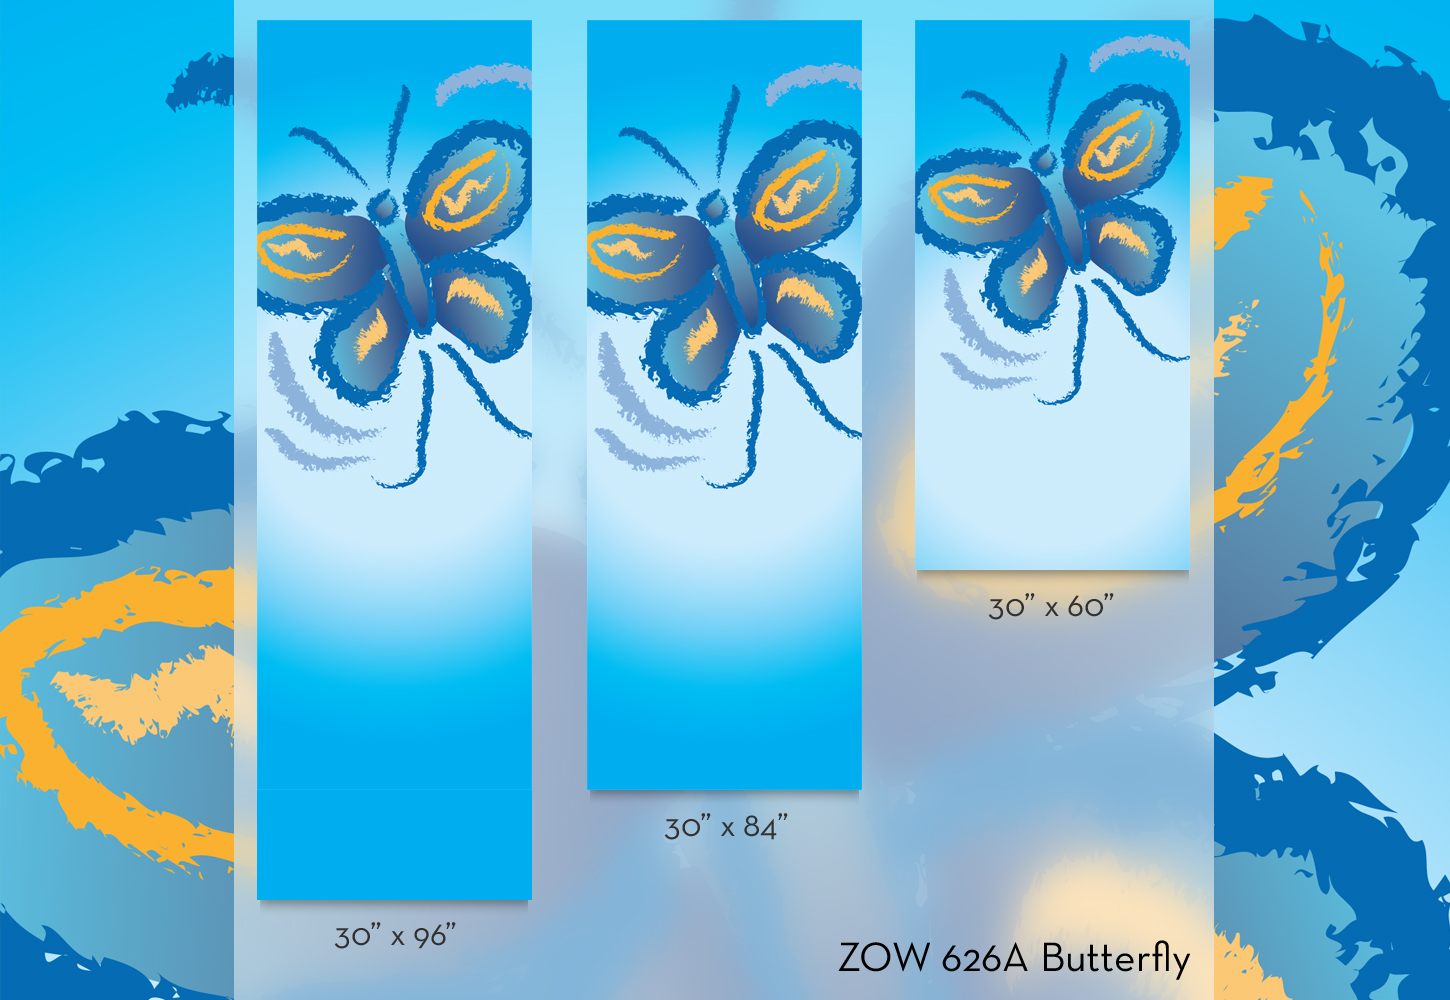 ZOW 626A Butterfly